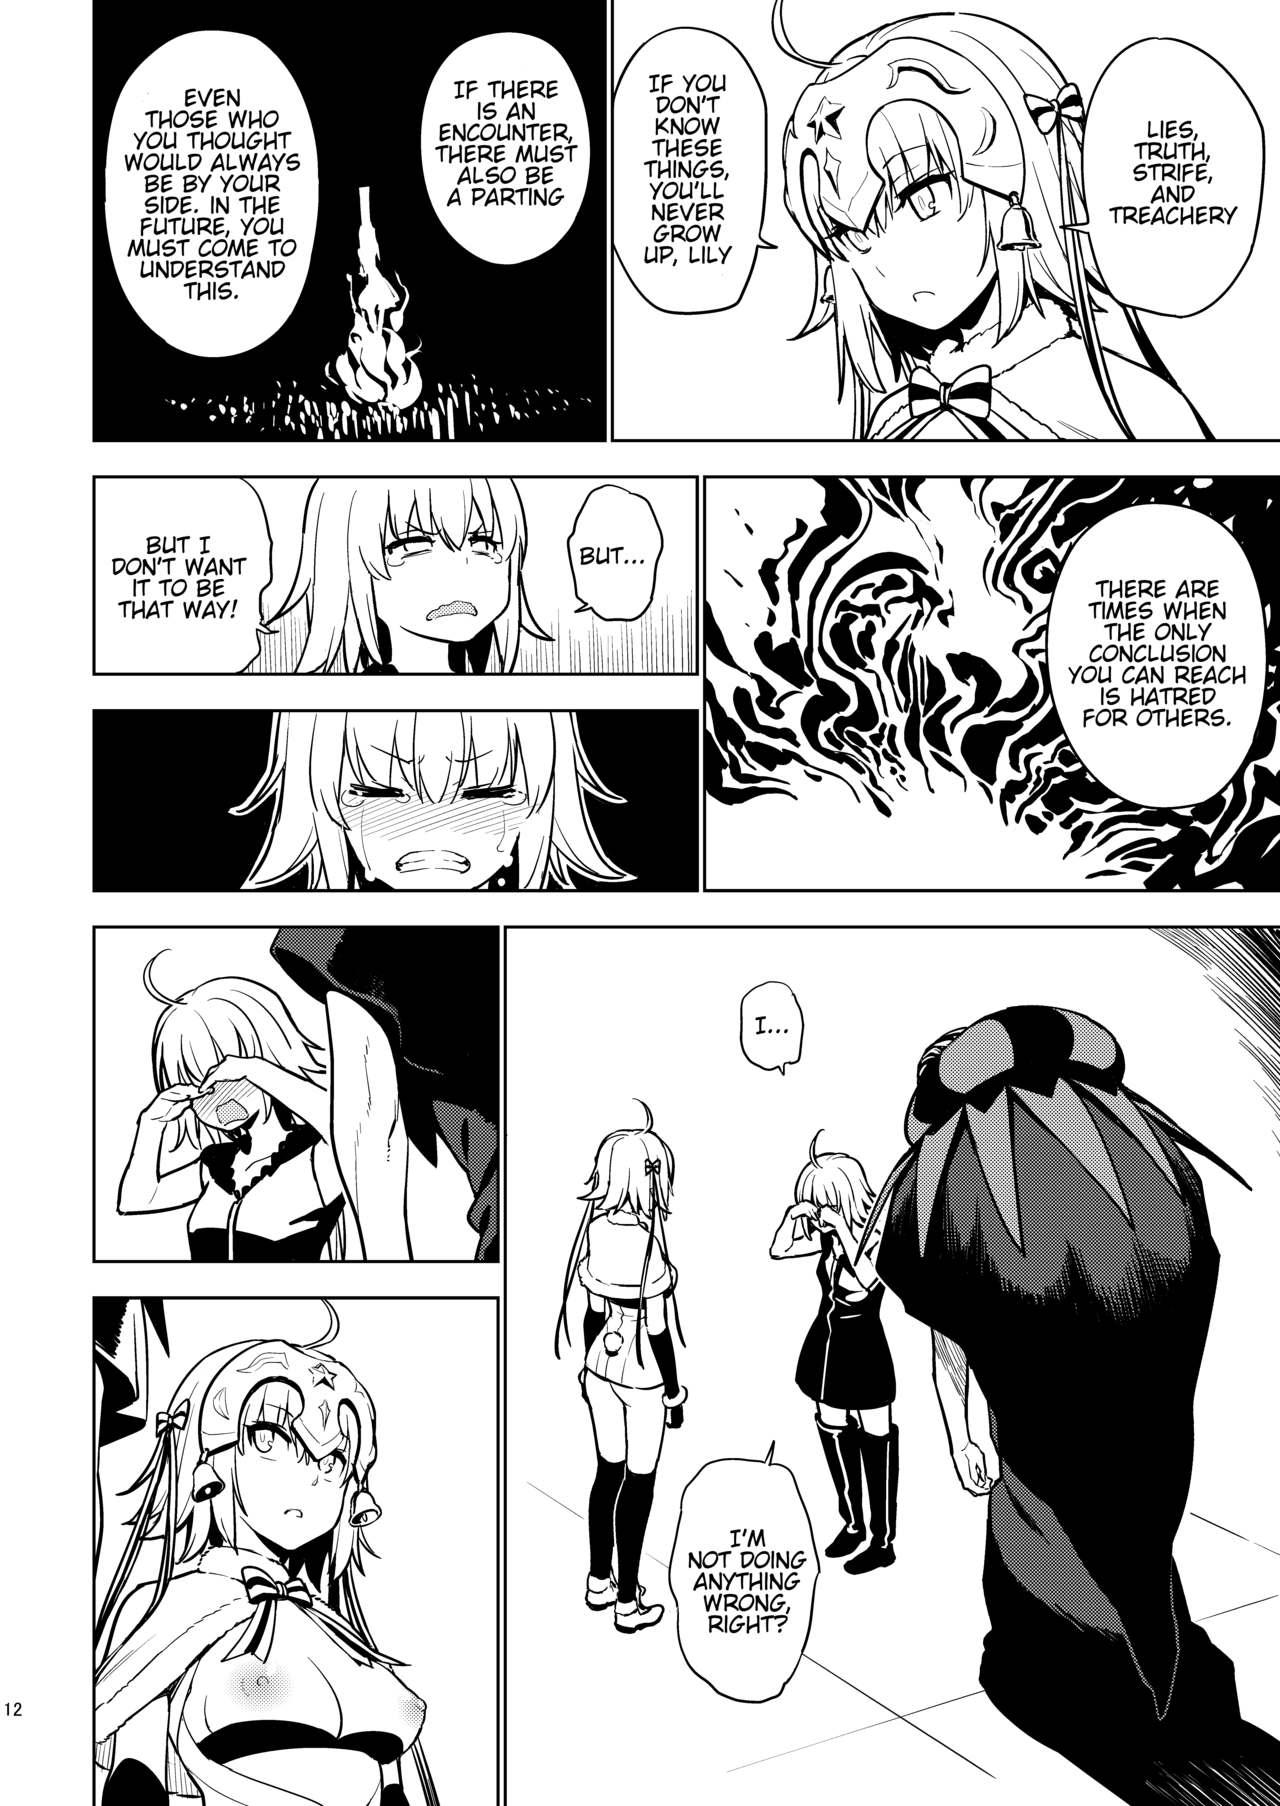 Danish SO BORED - Fate grand order Gaysex - Page 10